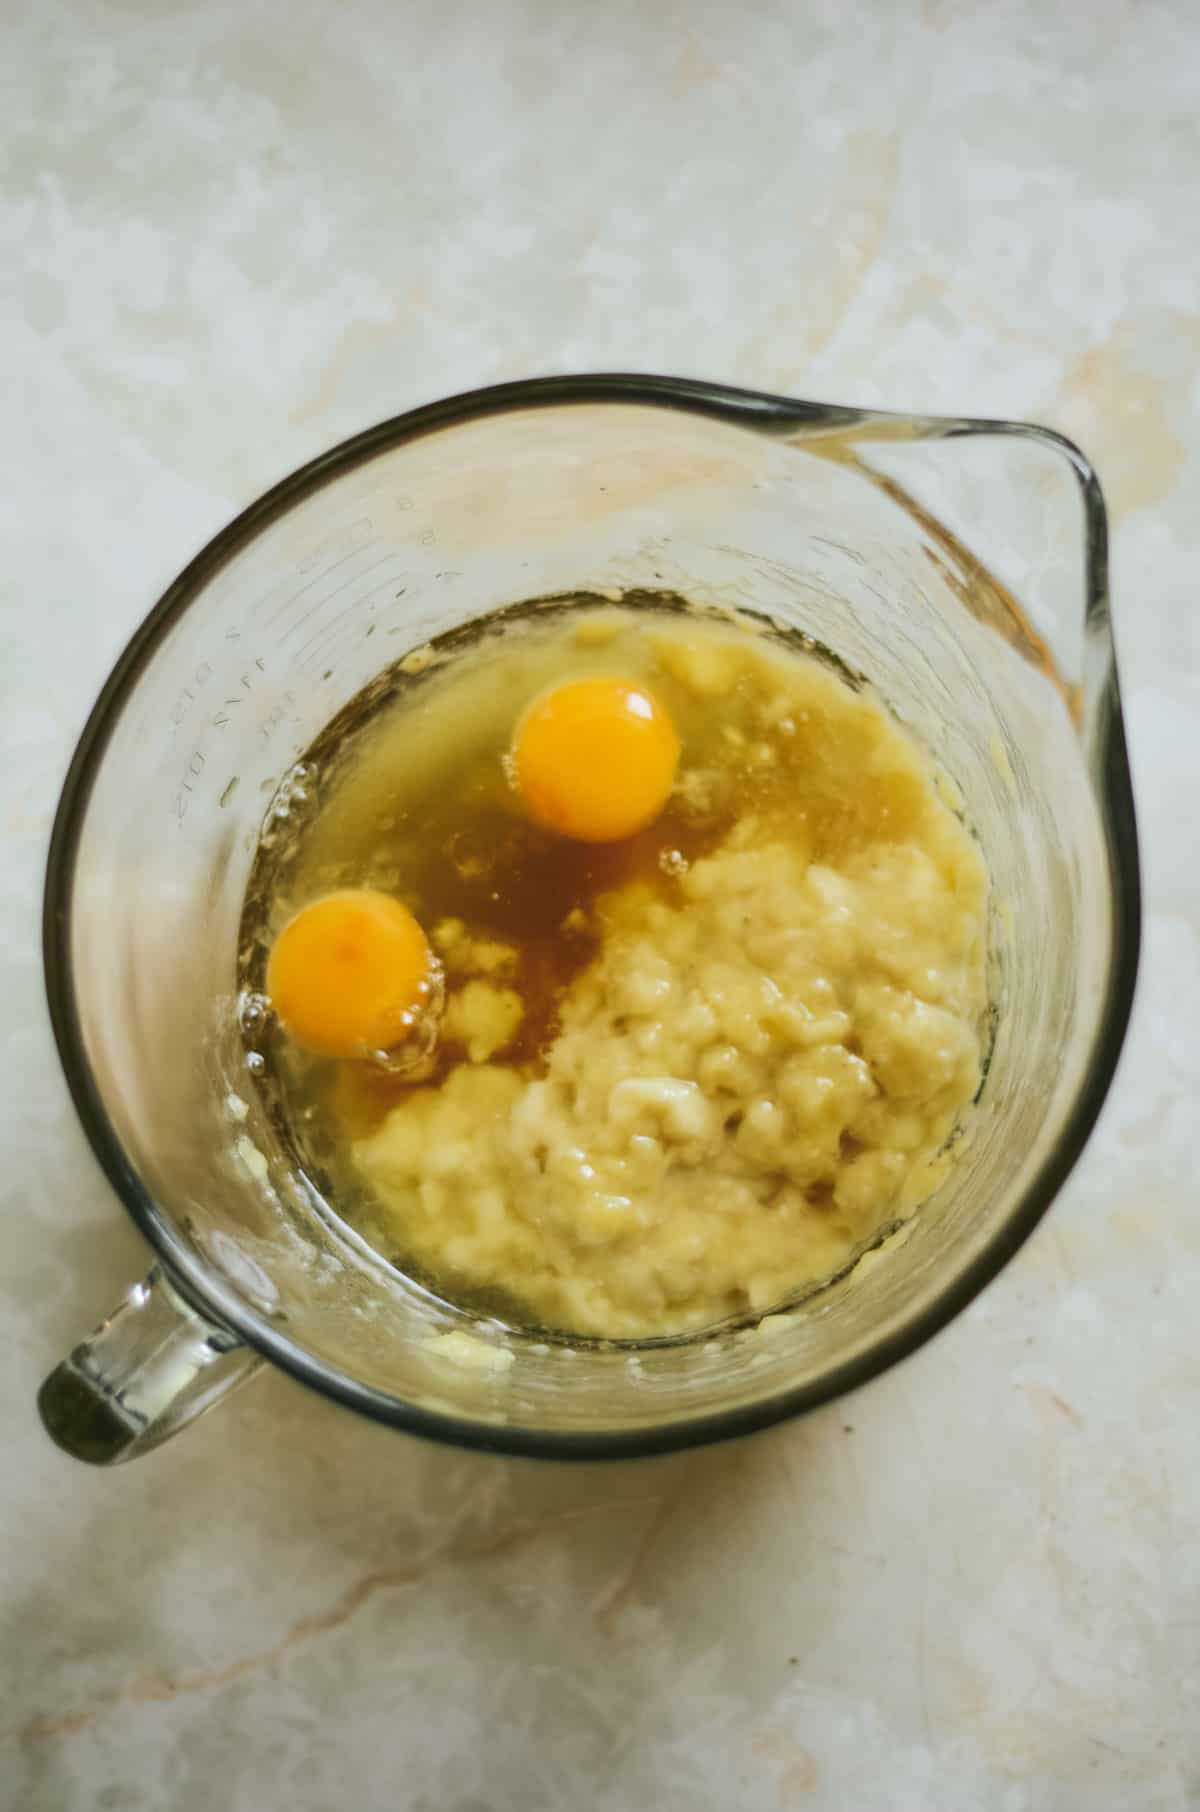 Eggs in a glass bowl with mashed banana for muffins.